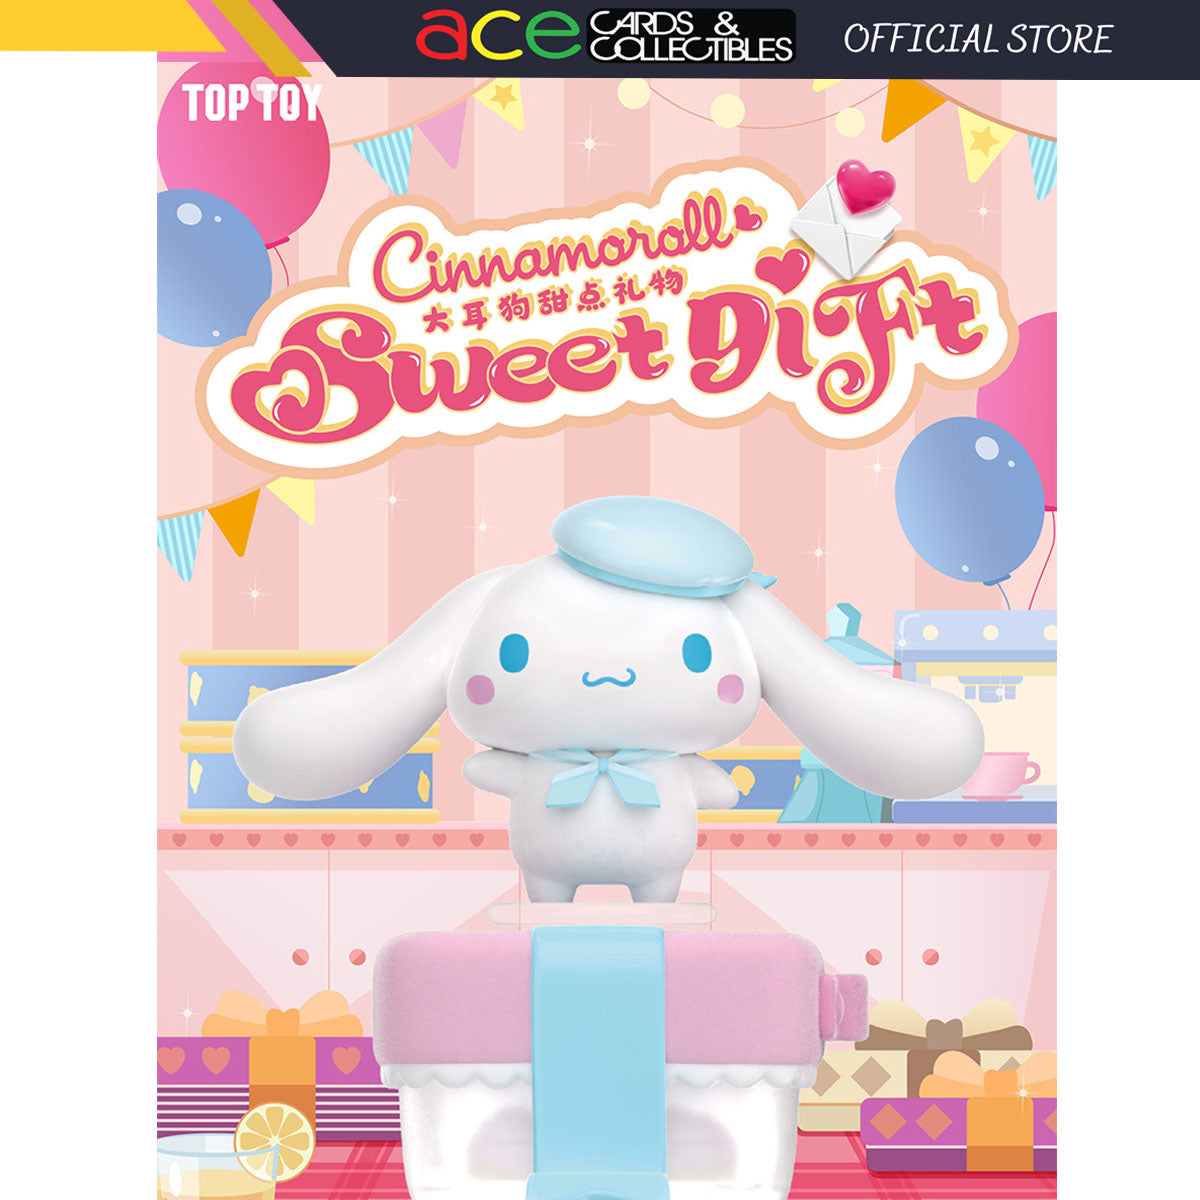 TOPTOY x Cinnamoroll Sweet Gift Chocolate Hearts Series-Display Box (8pcs)-TopToy-Ace Cards &amp; Collectibles